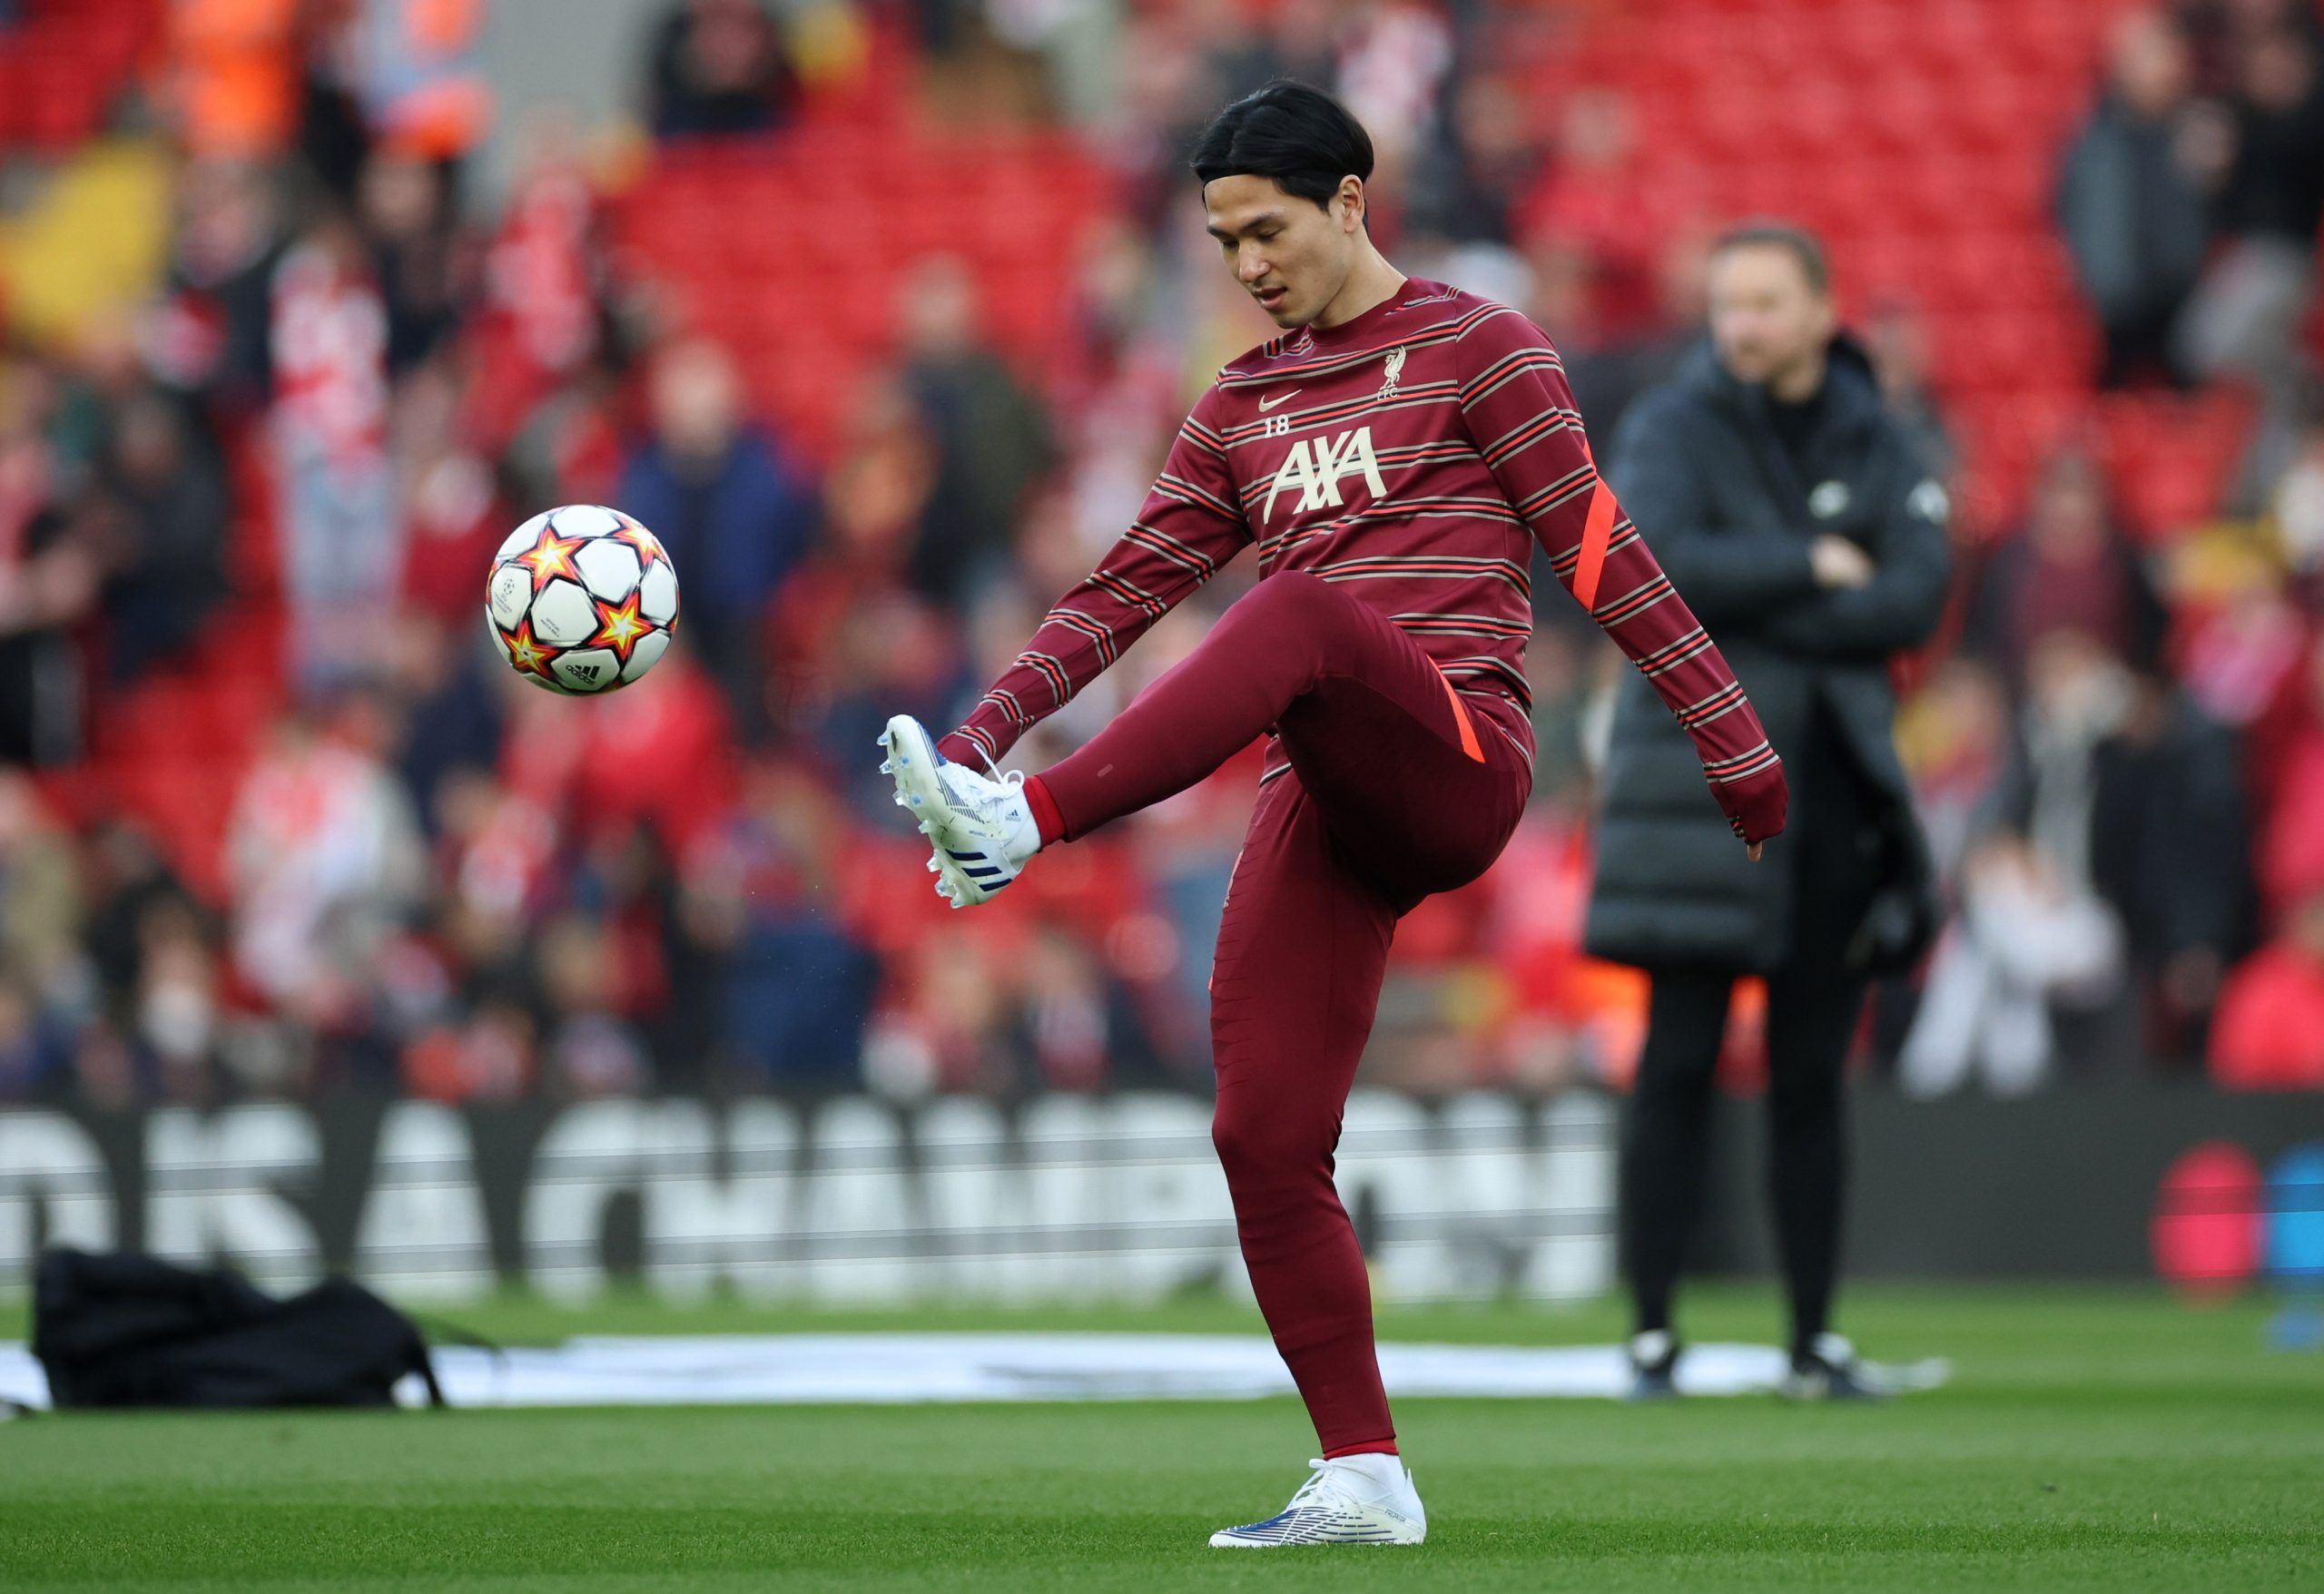 Soccer Football - Champions League - Semi Final - First Leg - Liverpool v Villarreal - Anfield, Liverpool, Britain - April 27, 2022 Liverpool's Takumi Minamino during the warm up before the match REUTERS/Phil Noble